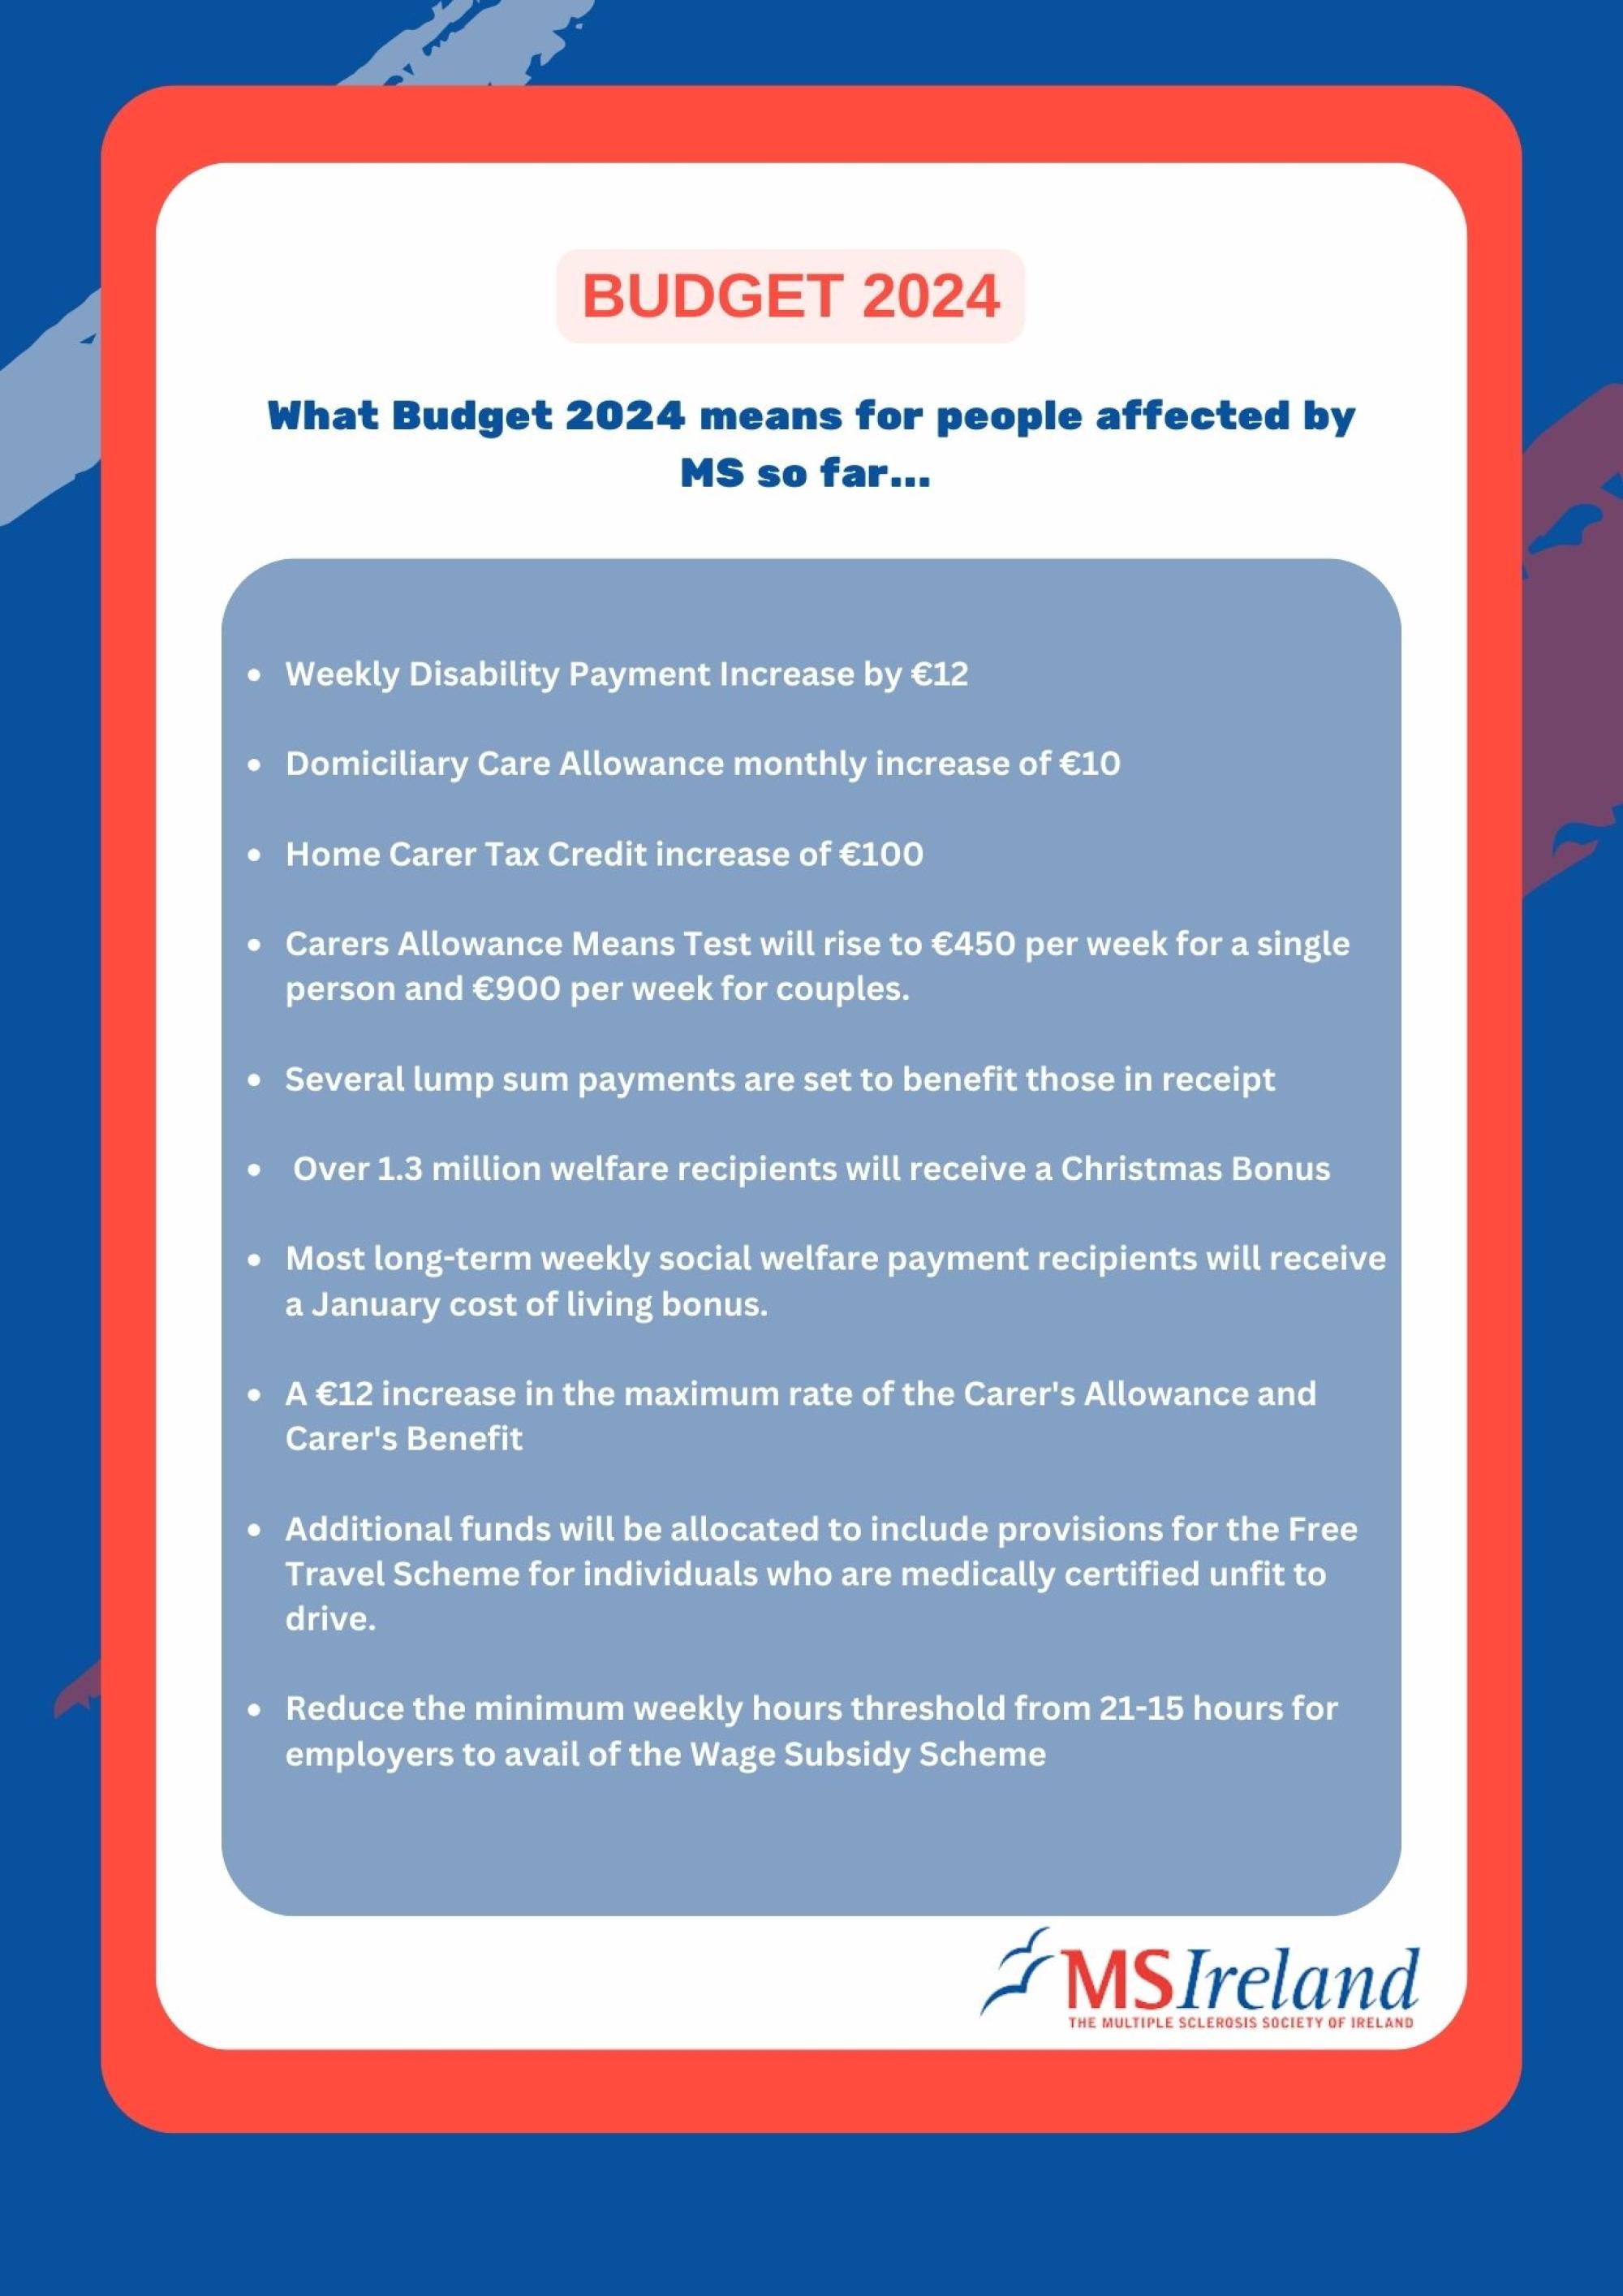 What Budget 2024 means for people affected by MS 